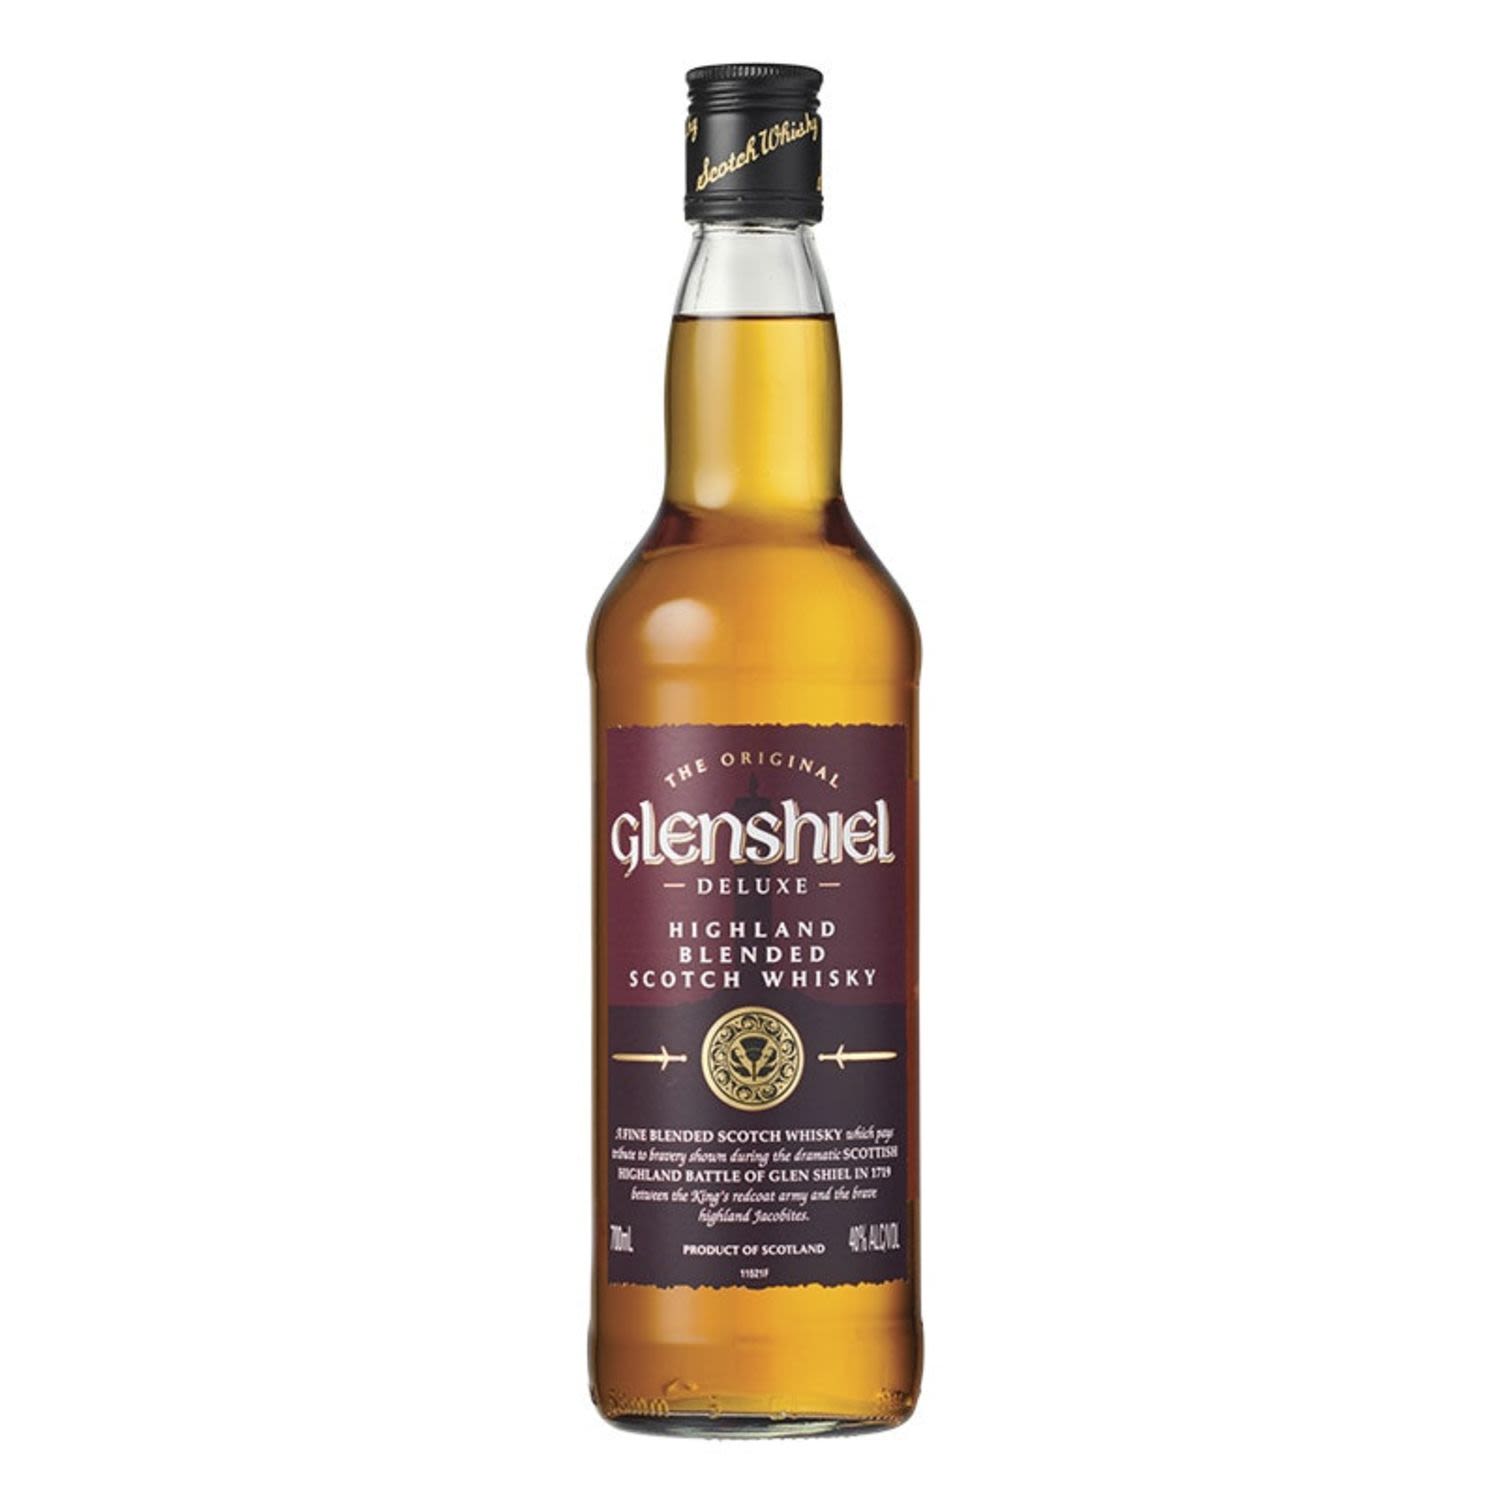 Perfectly blended, Glenshiel is one of Scotland’s finest whiskys. Deliciously smooth, it is a versatile spirit that can be enjoyed on the rocks or in a cocktail.<br /> <br />Alcohol Volume: 40.00%<br /><br />Pack Format: Bottle<br /><br />Standard Drinks: 22</br /><br />Pack Type: Bottle<br /><br />Country of Origin: Scotland<br />